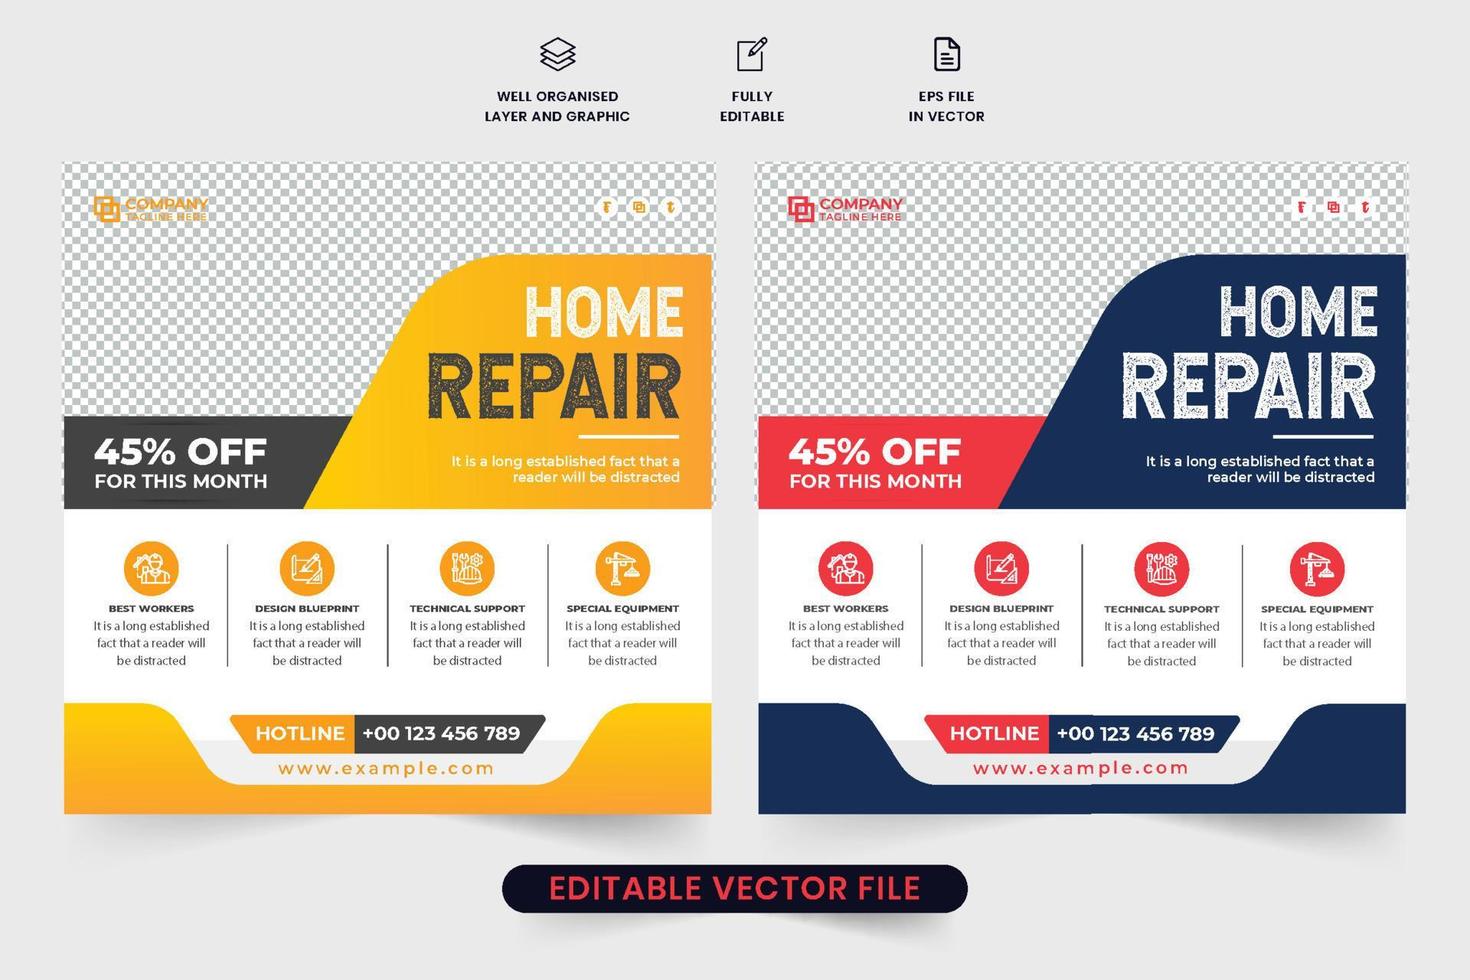 Home construction and repair service social media post vector with yellow and red colors. Real estate maintenance poster design with photo placeholders. Handyman construction business promotion.